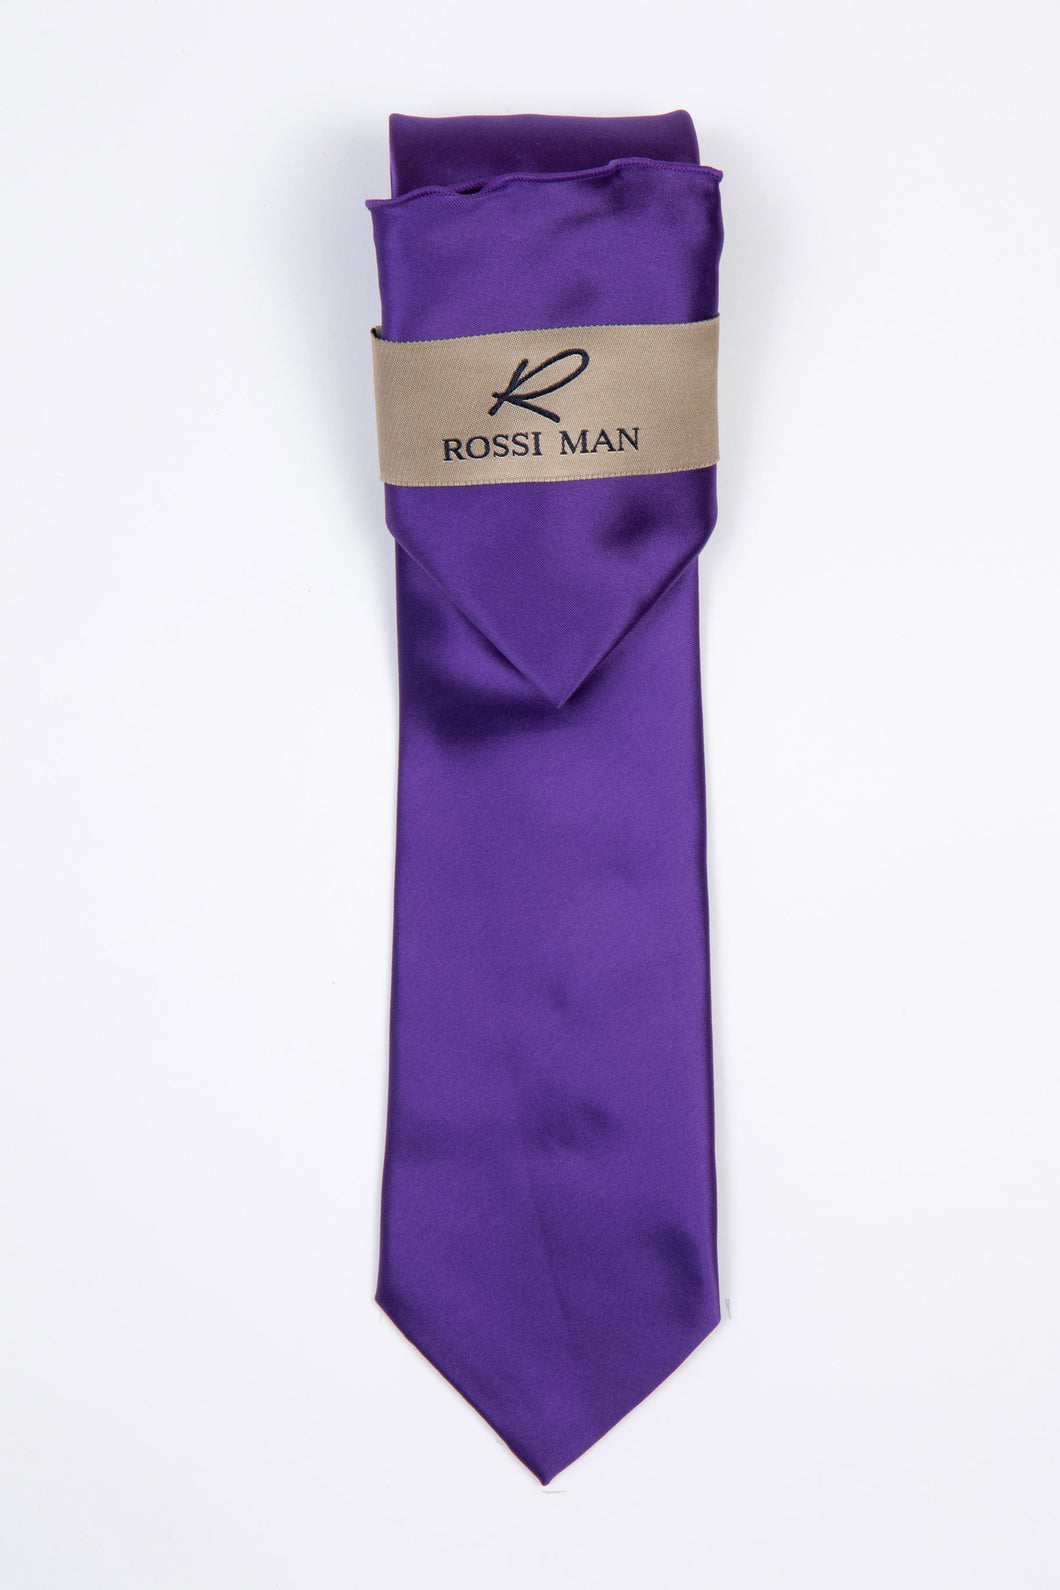 Rossi Man Tie and Pocket Round - RMR665-14